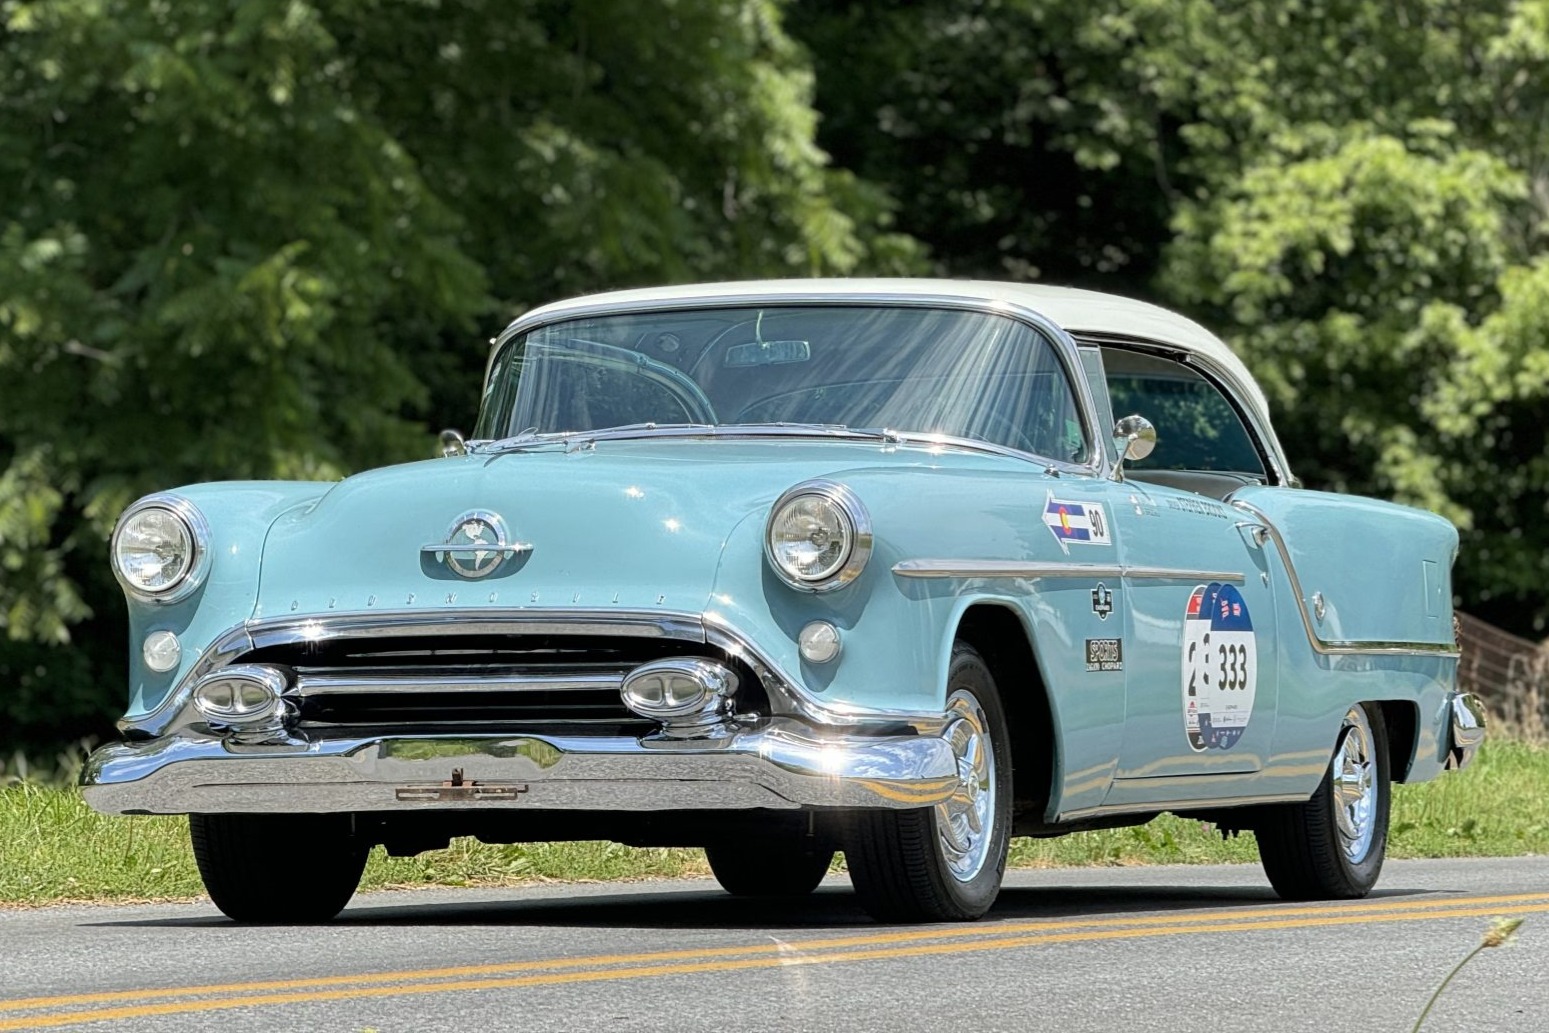 Used Ex–Mille Miglia Storica 1954 Oldsmobile Super 88 Holiday Review